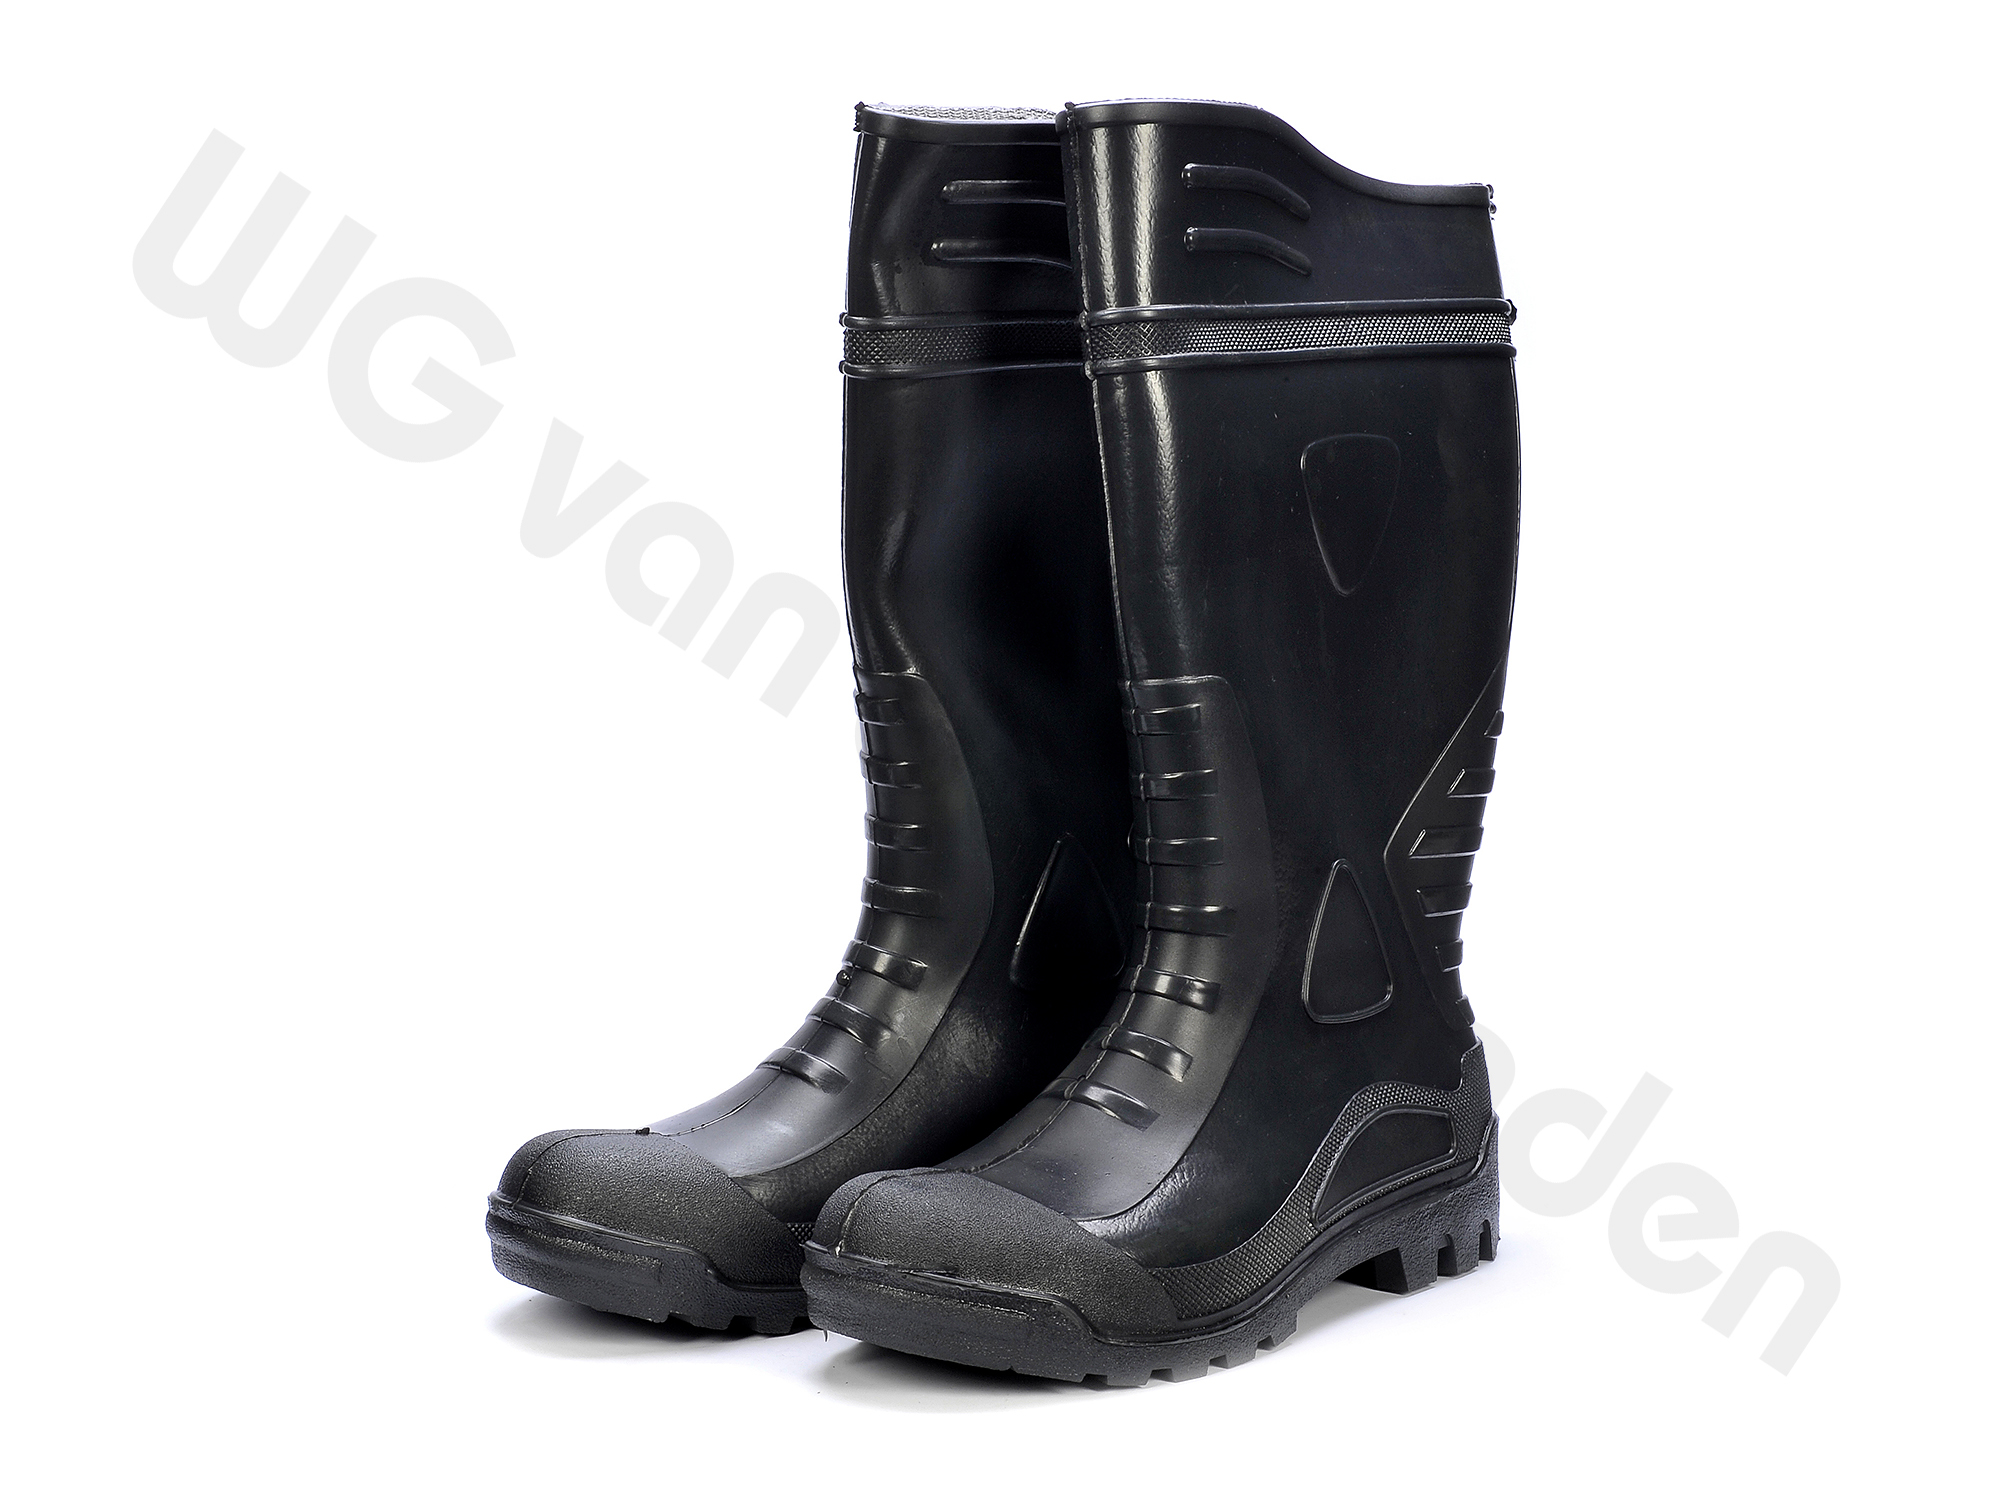 880207 BOOTS SAFETY S4 PVC WITH STEEL TOE SIZE 44/28CM CE